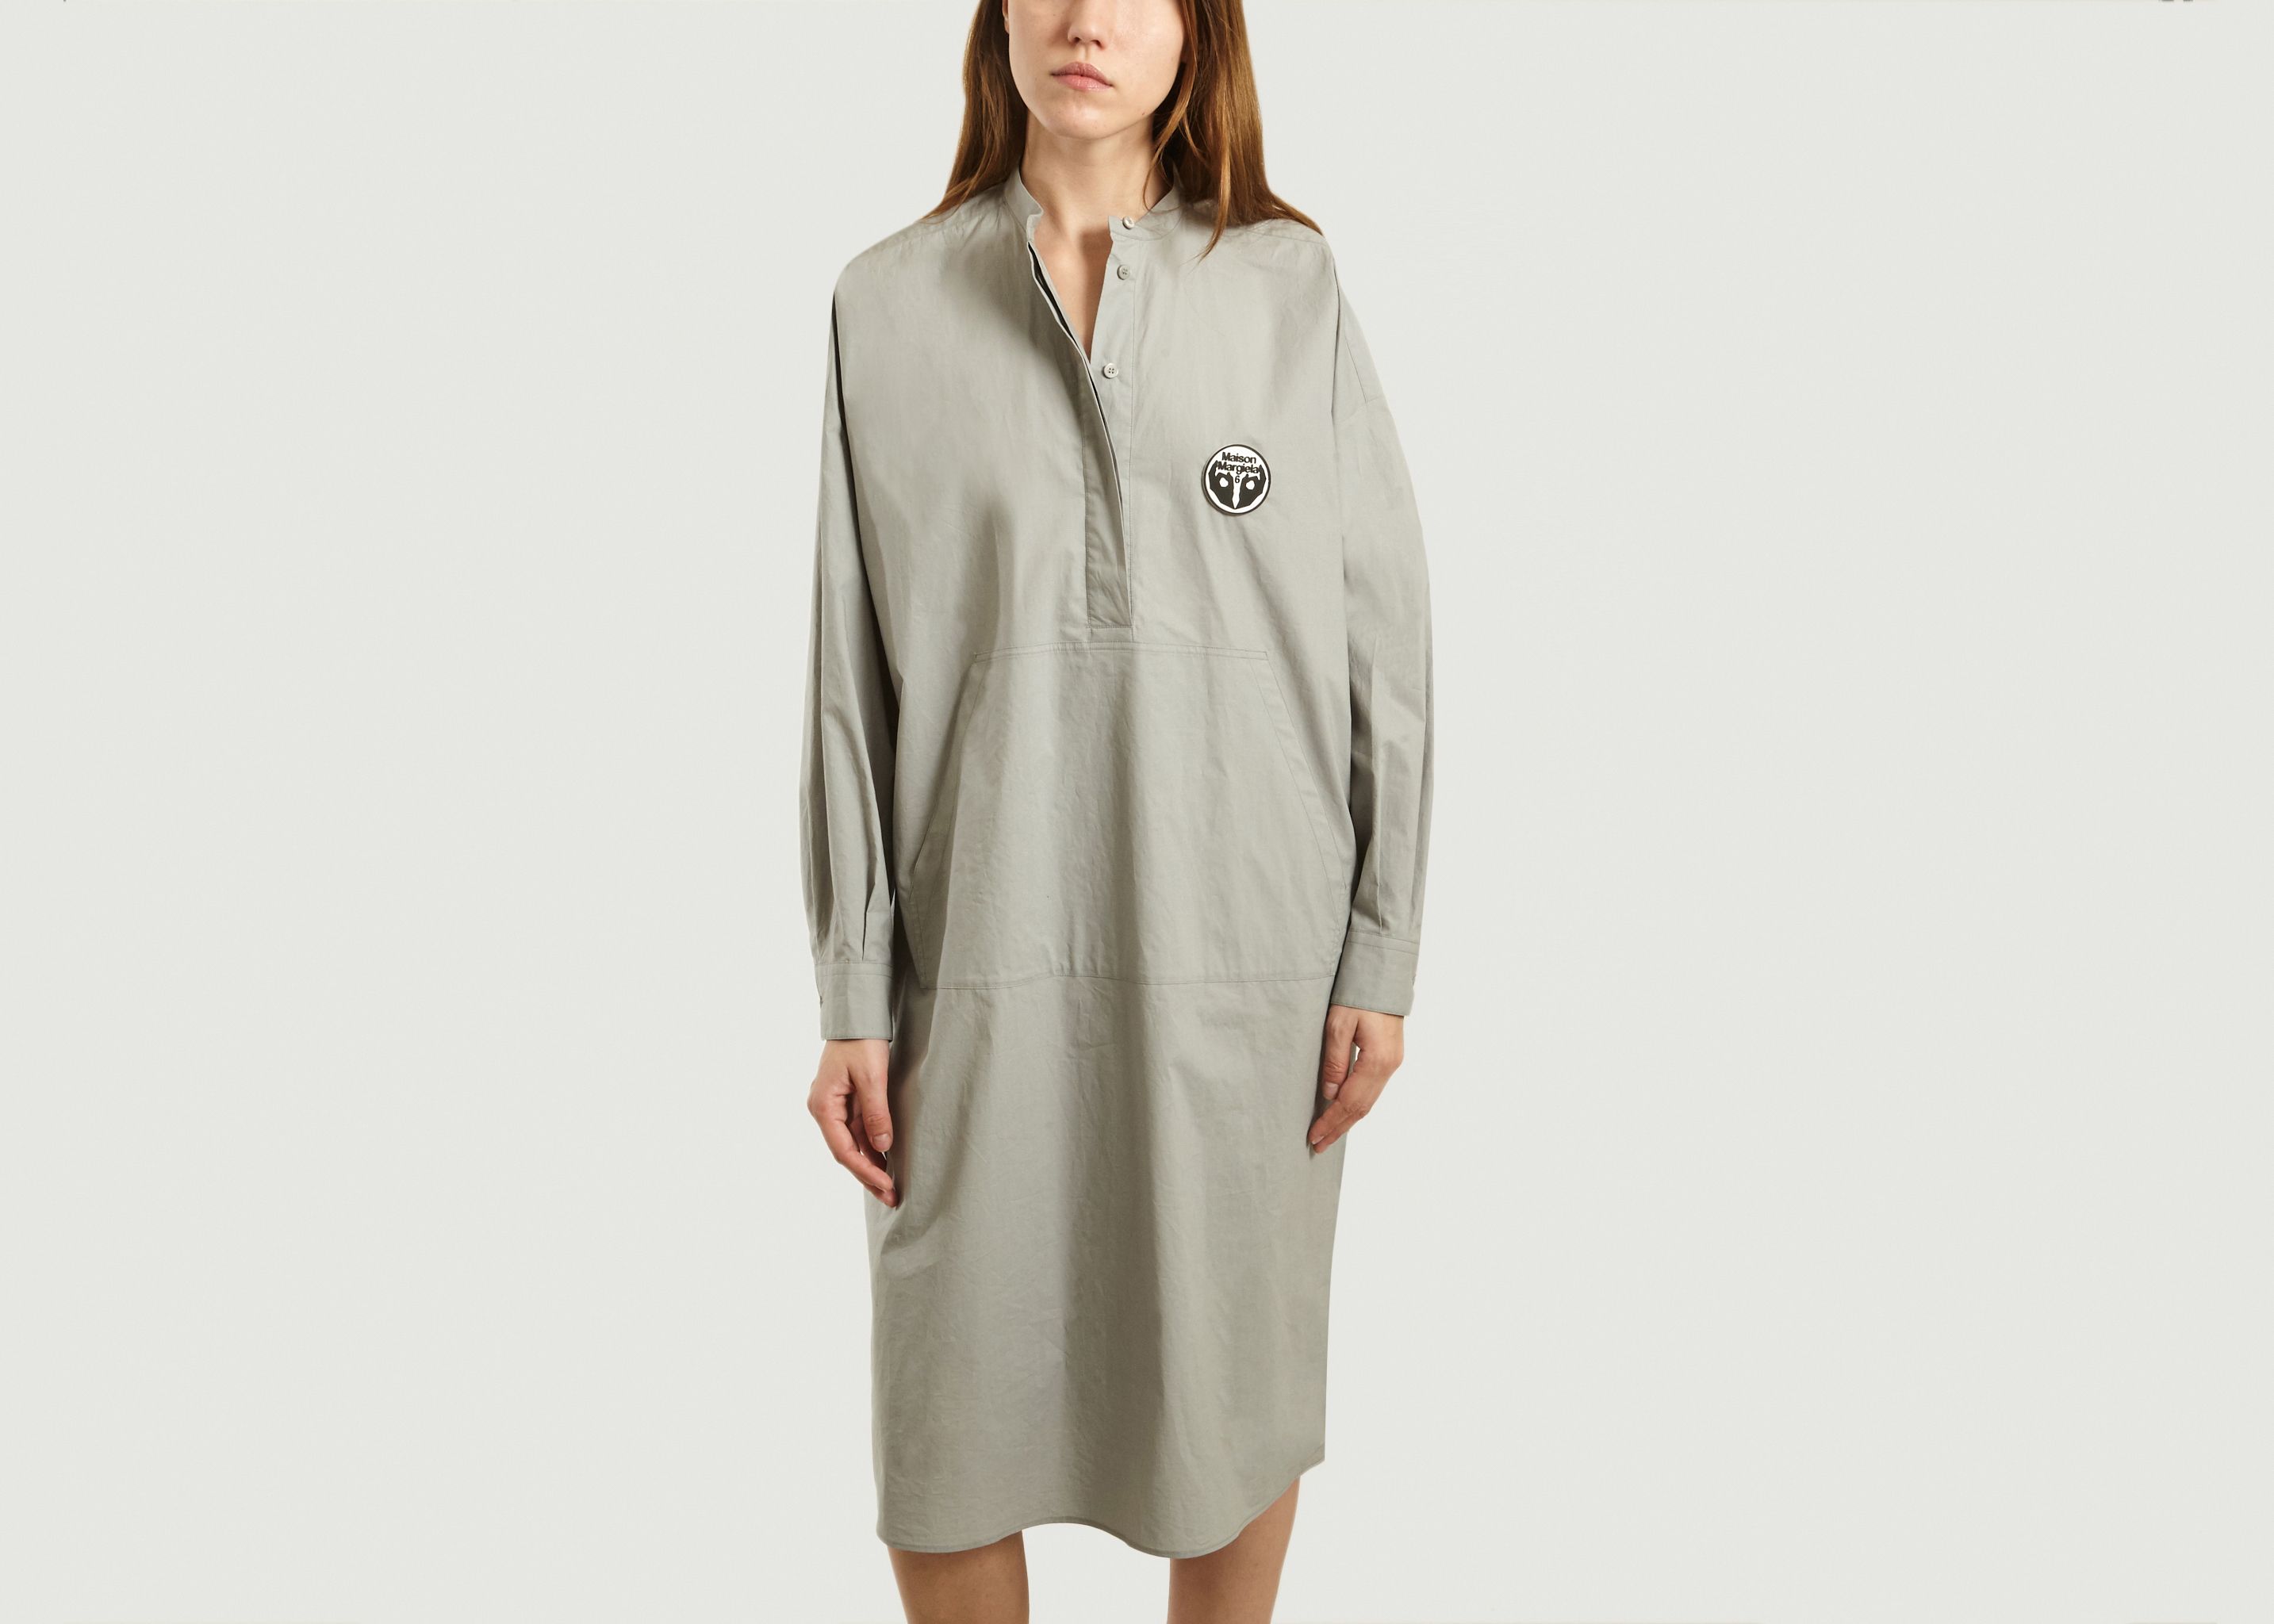 MM6 by Maison Martin Margiela Sweatshirt Dress in White Womens Clothing Dresses Casual and day dresses 